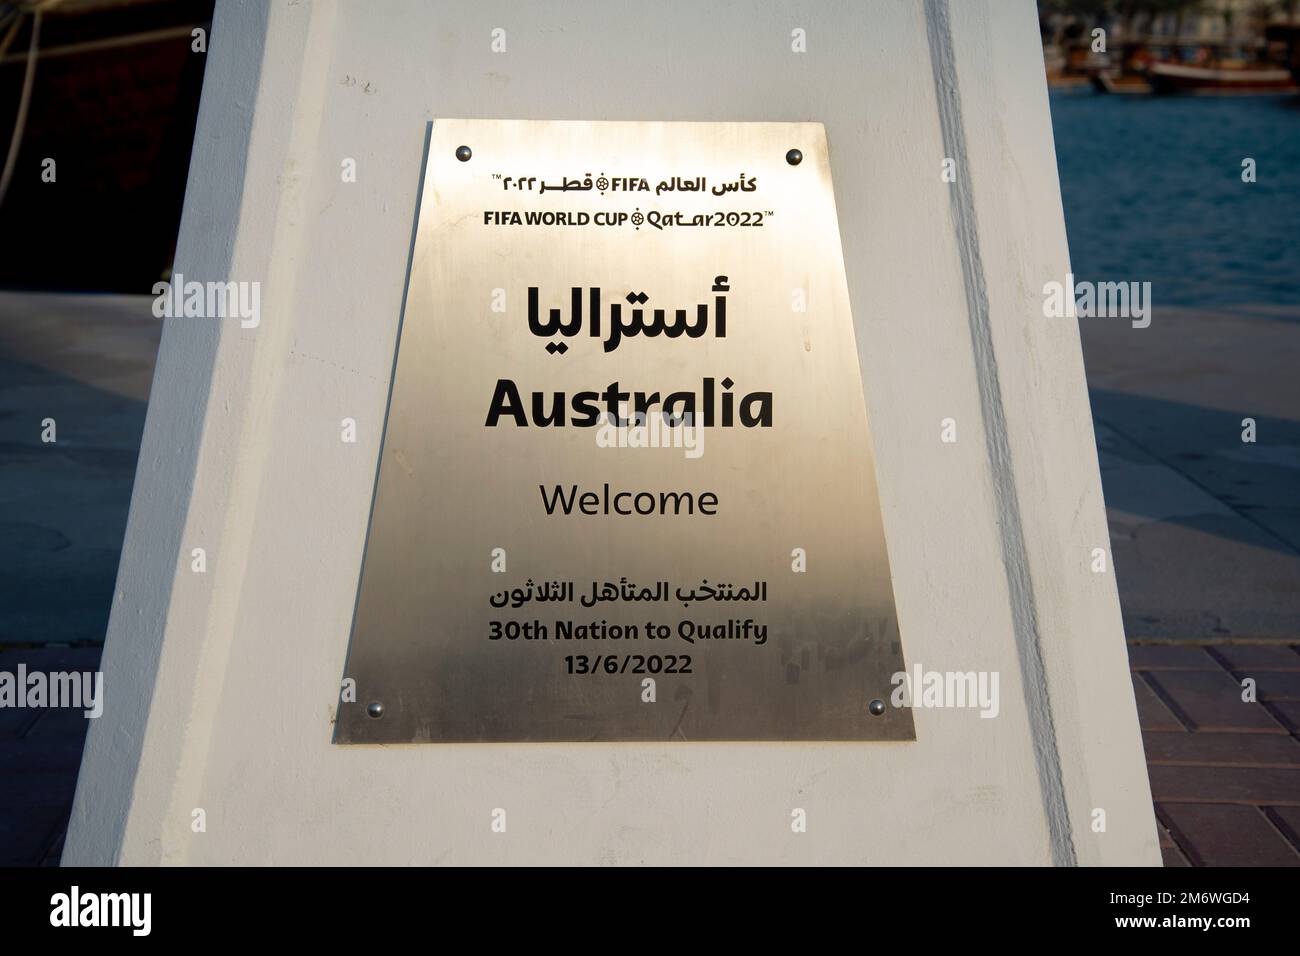 Doha, Qatar - October 6, 2022: FIFA World Cup qualified date plaque for Australia Stock Photo